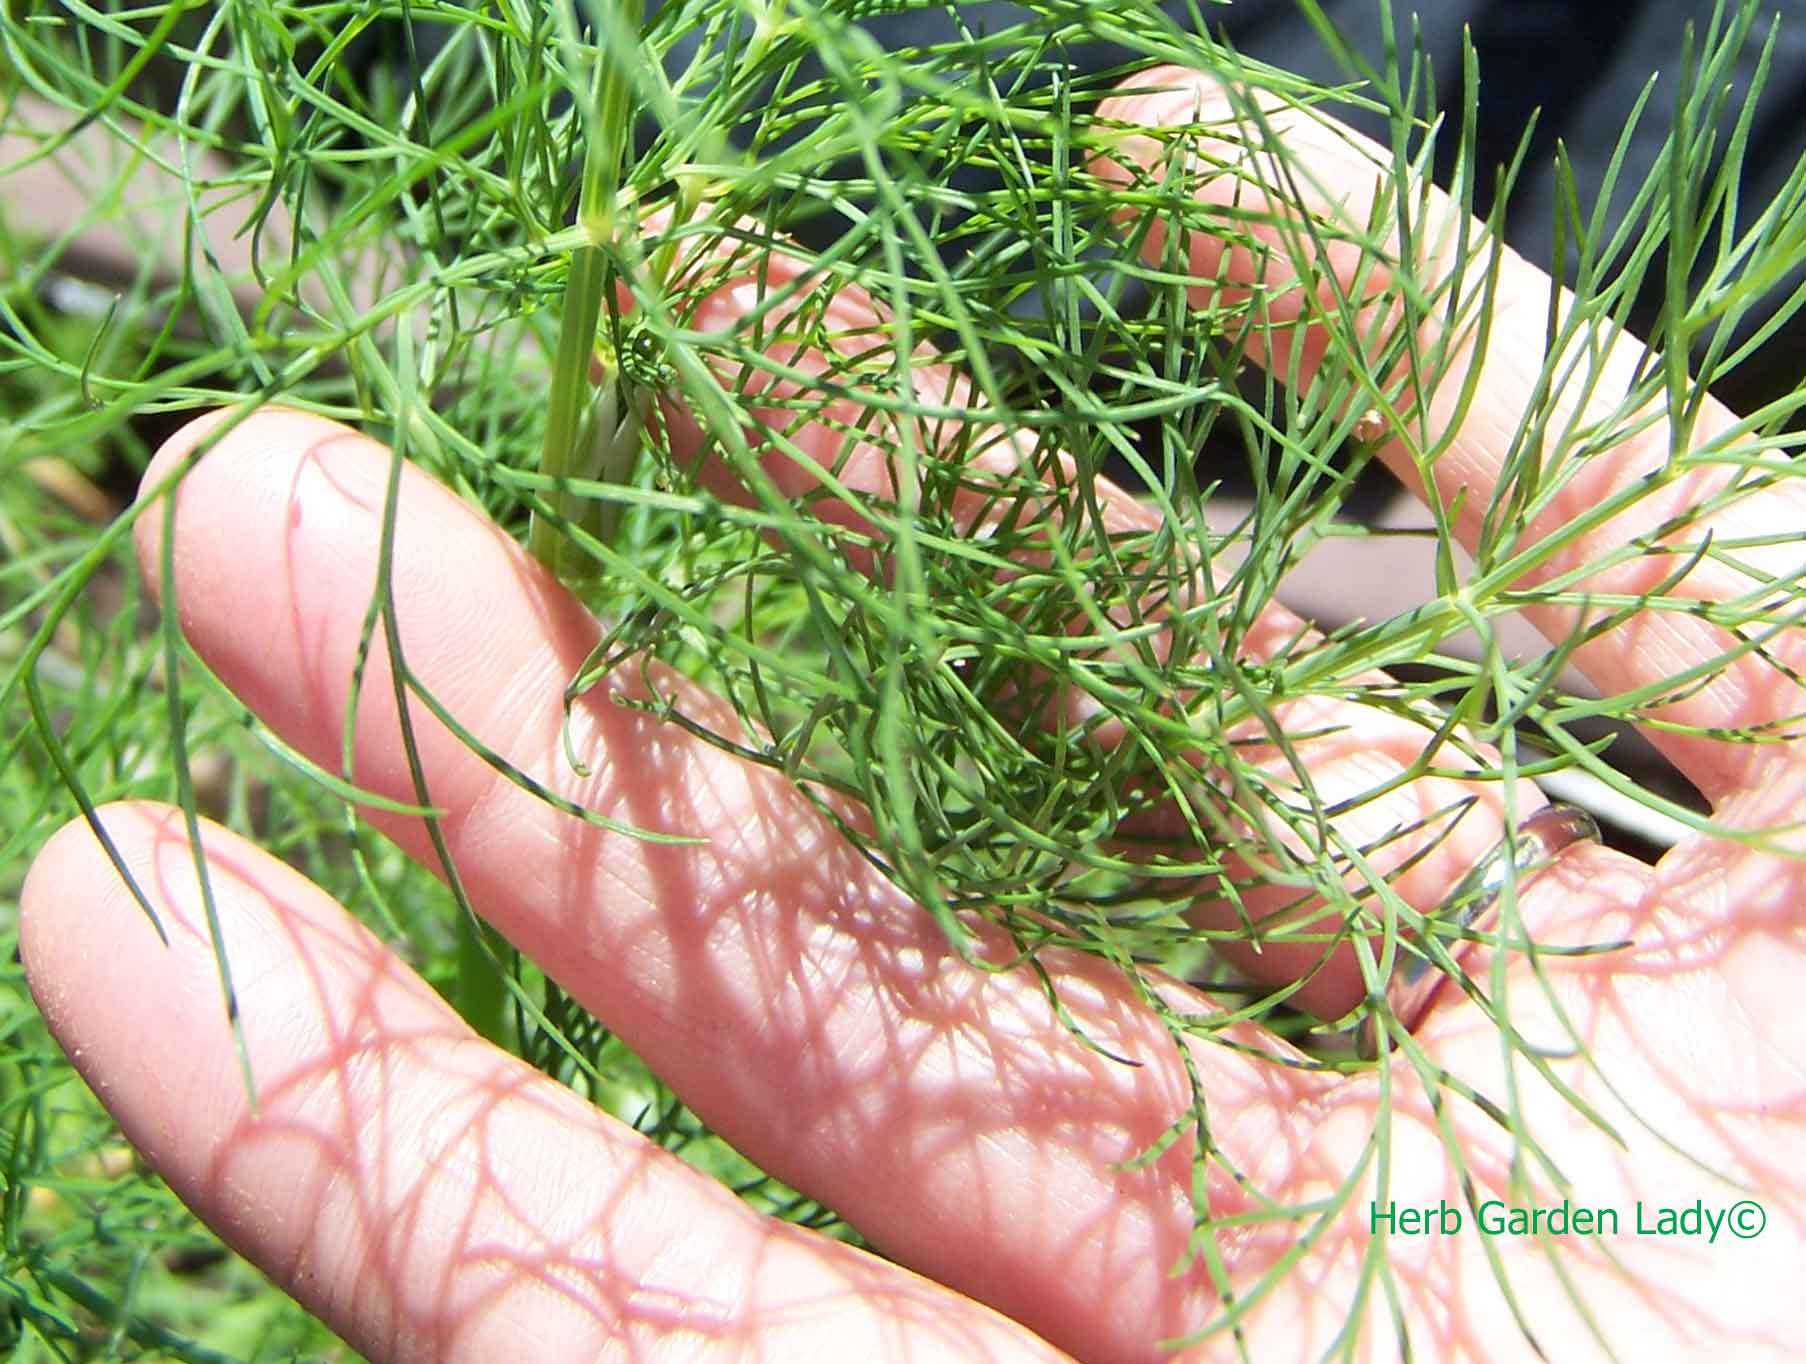 Dill weed is excellent herb to grow in a culinary herb garden, one of the must have herbs to grow each year.